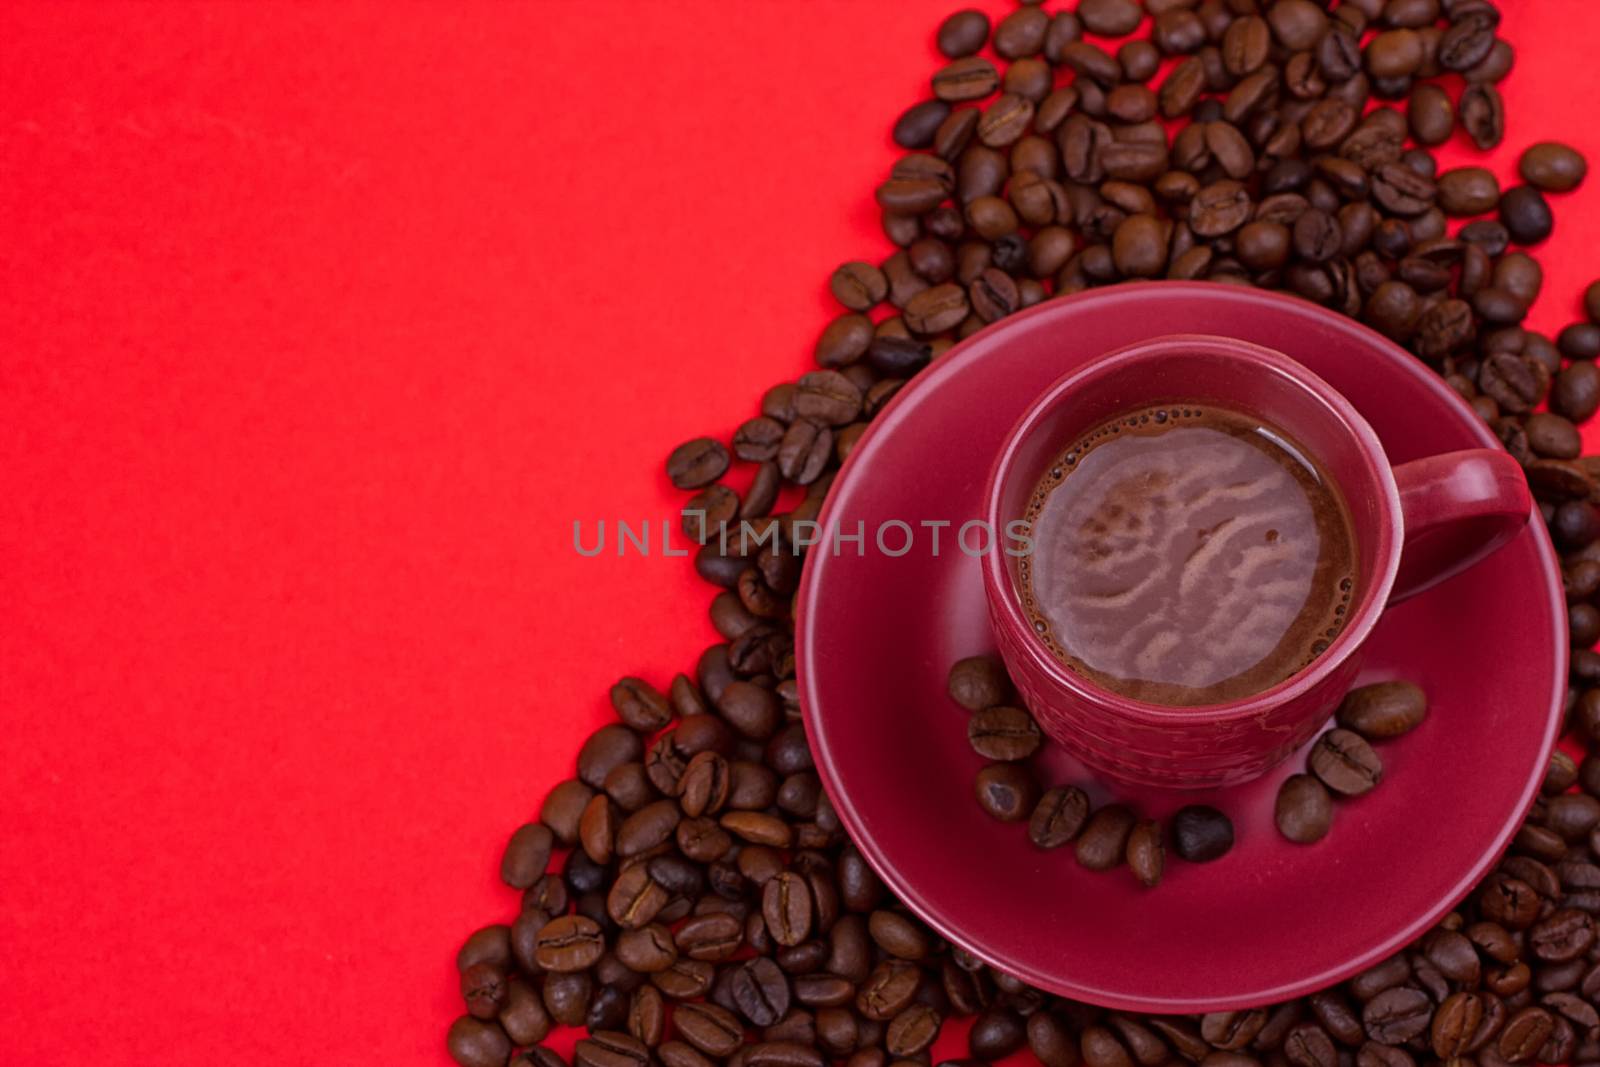 coffee cup with coffee beans on a red background